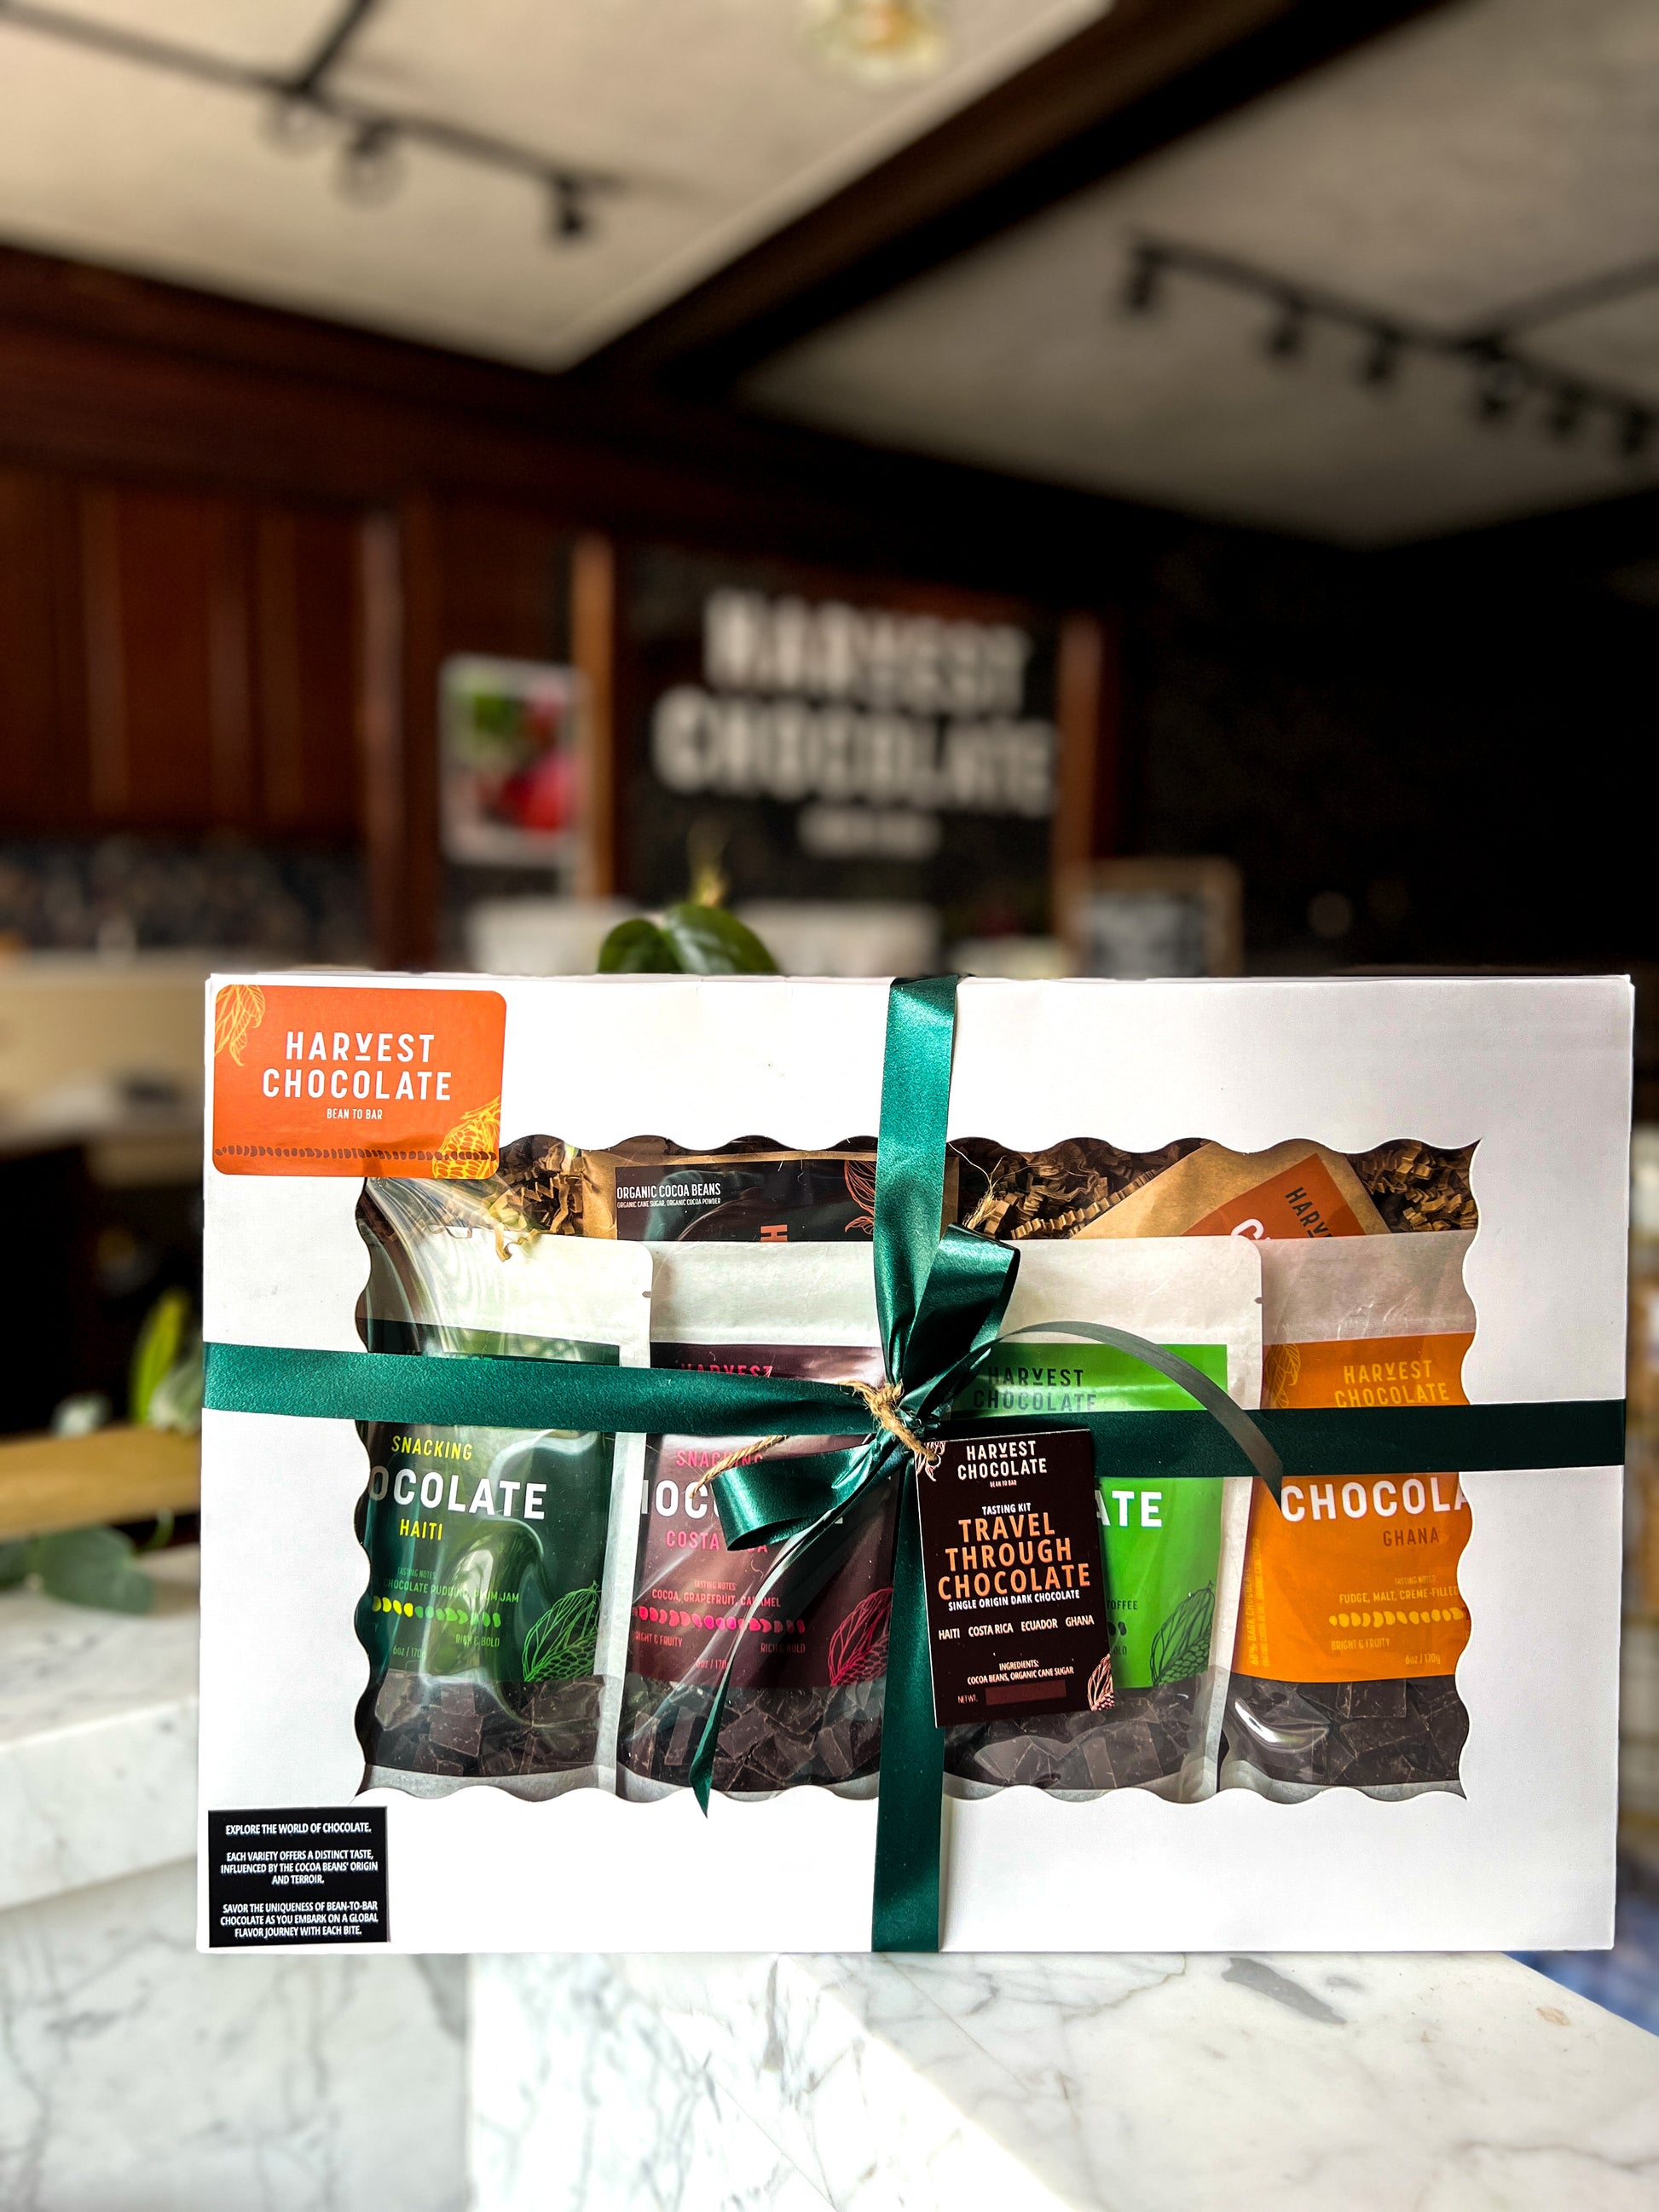 A Travel Through Chocolate Gift Box by Harvest Chocolate, featuring multiple flavors of bean-to-bar chocolate bars, tied with a green ribbon, displayed on a counter in a kitchen setting.